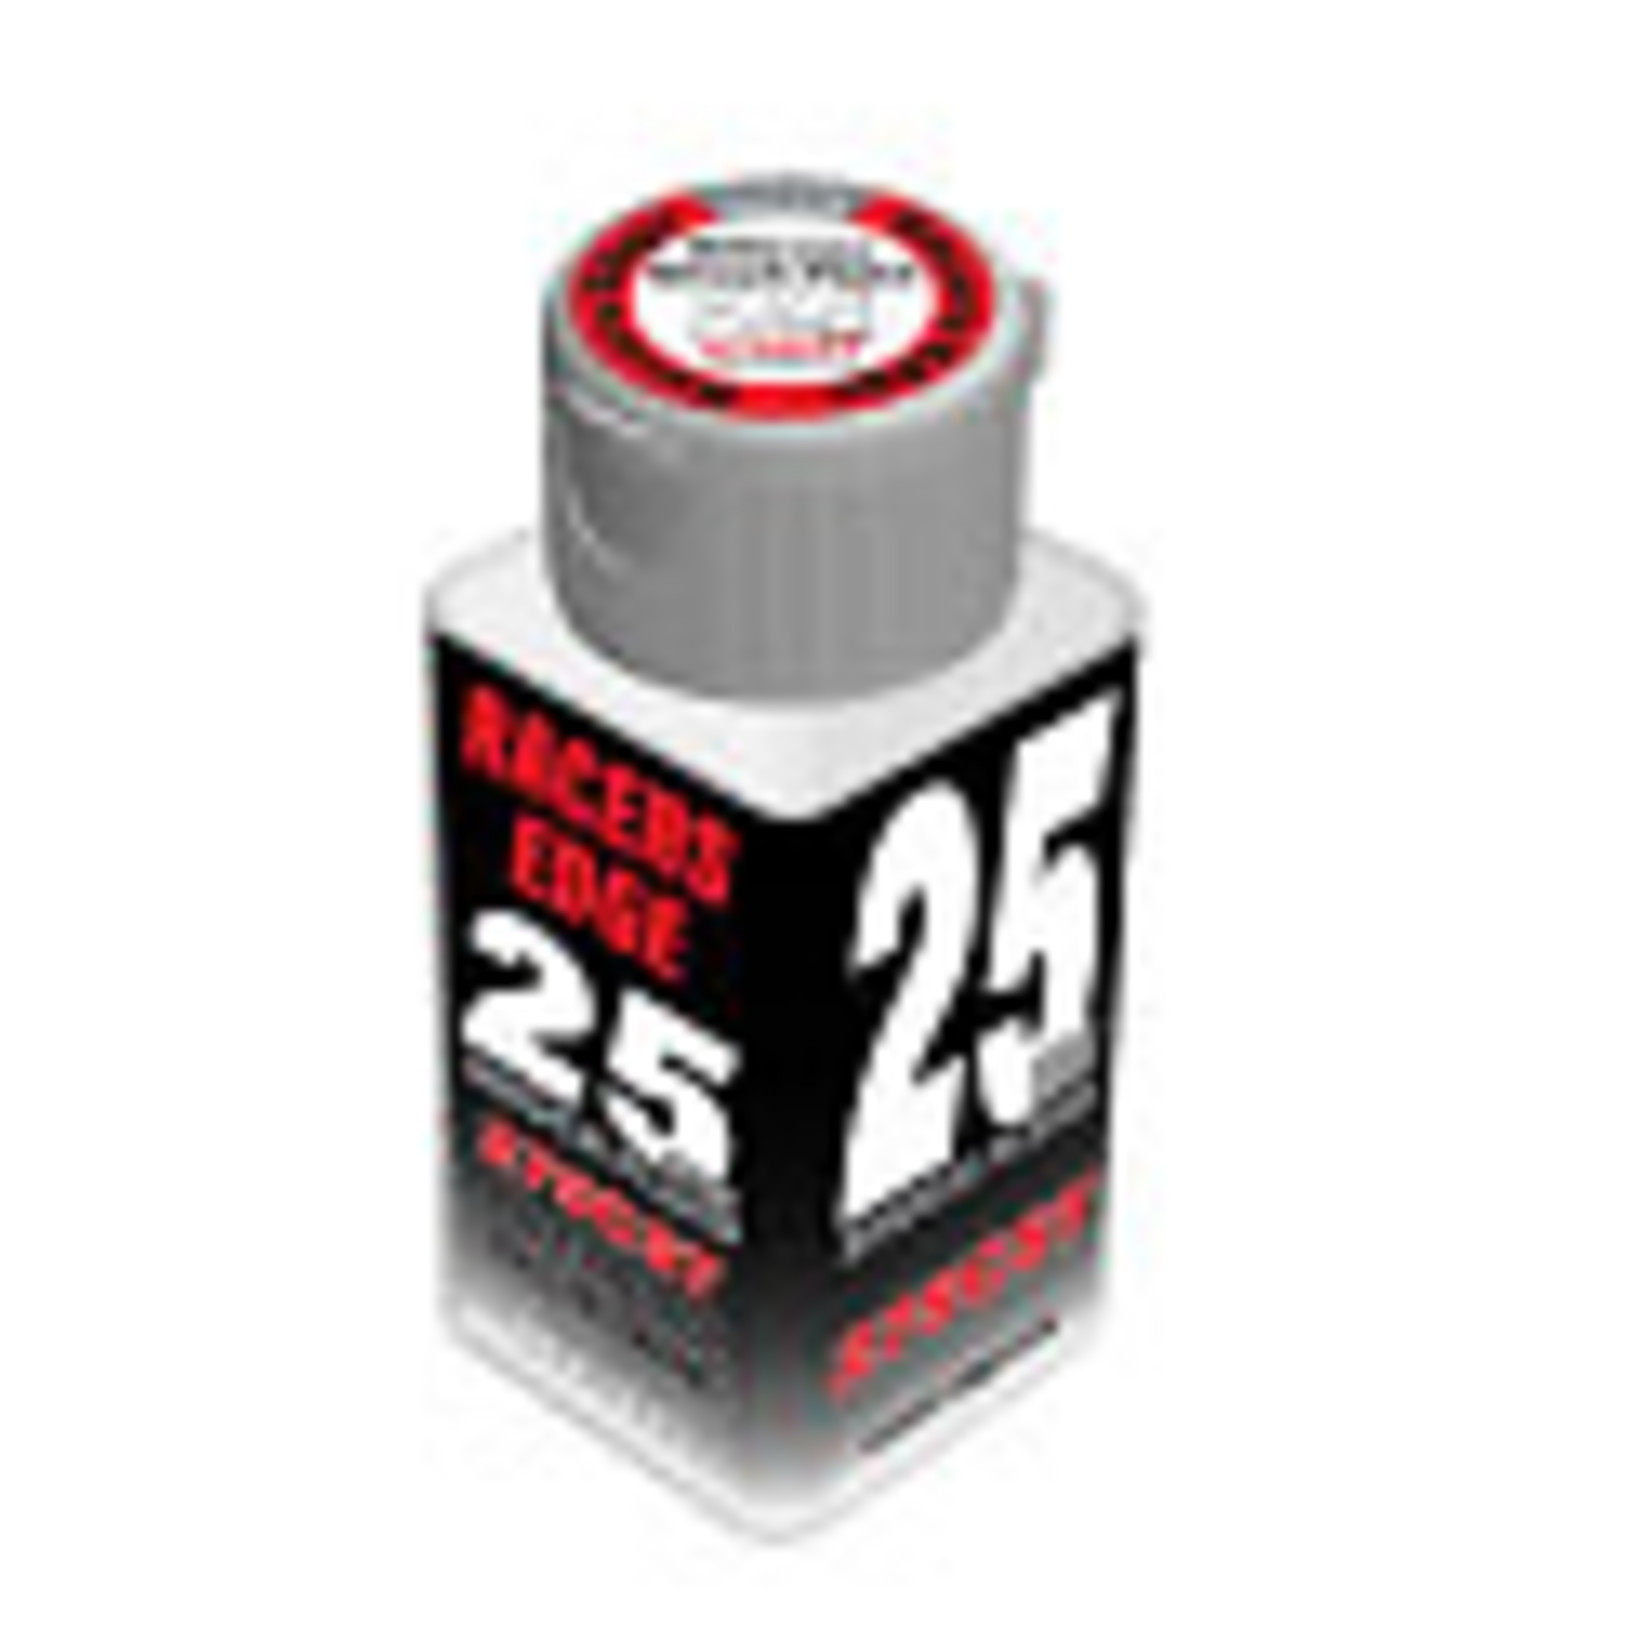 Racers Edge 25 Weight, 275cSt, 70ml 2.36oz Pure Silicone Shock Oil